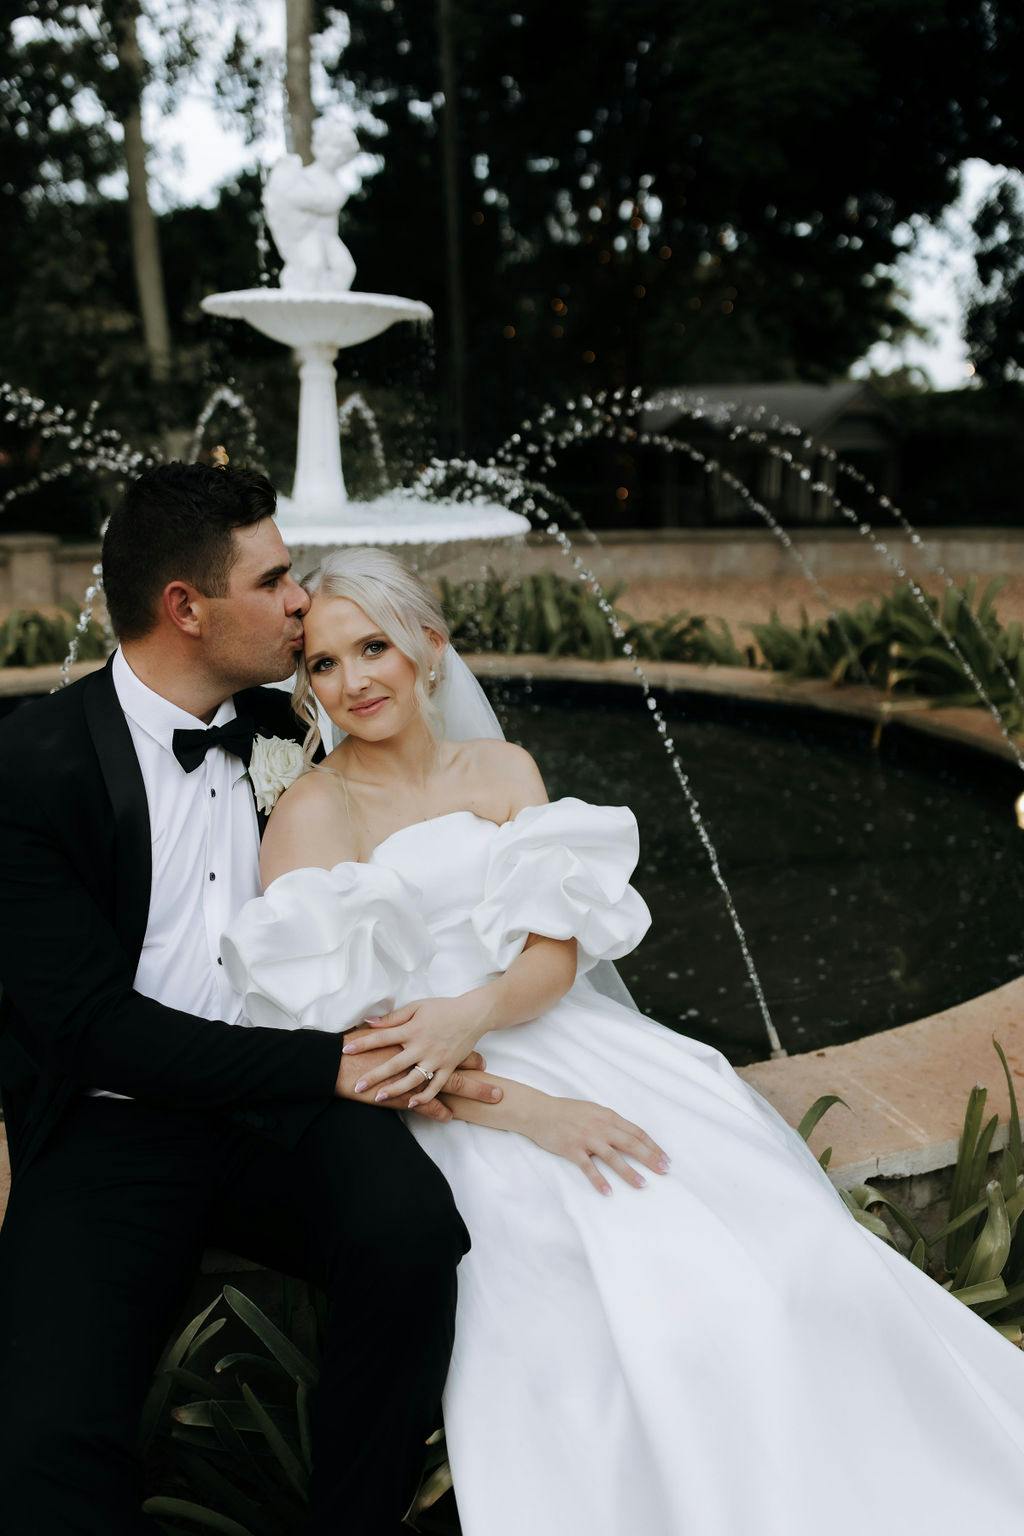 A couple dressed in wedding attire sits by a fountain. The groom, in a black tuxedo, gently kisses the bride, who is wearing an off-shoulder white gown. They are surrounded by greenery, and the fountain water arcs elegantly in the background.